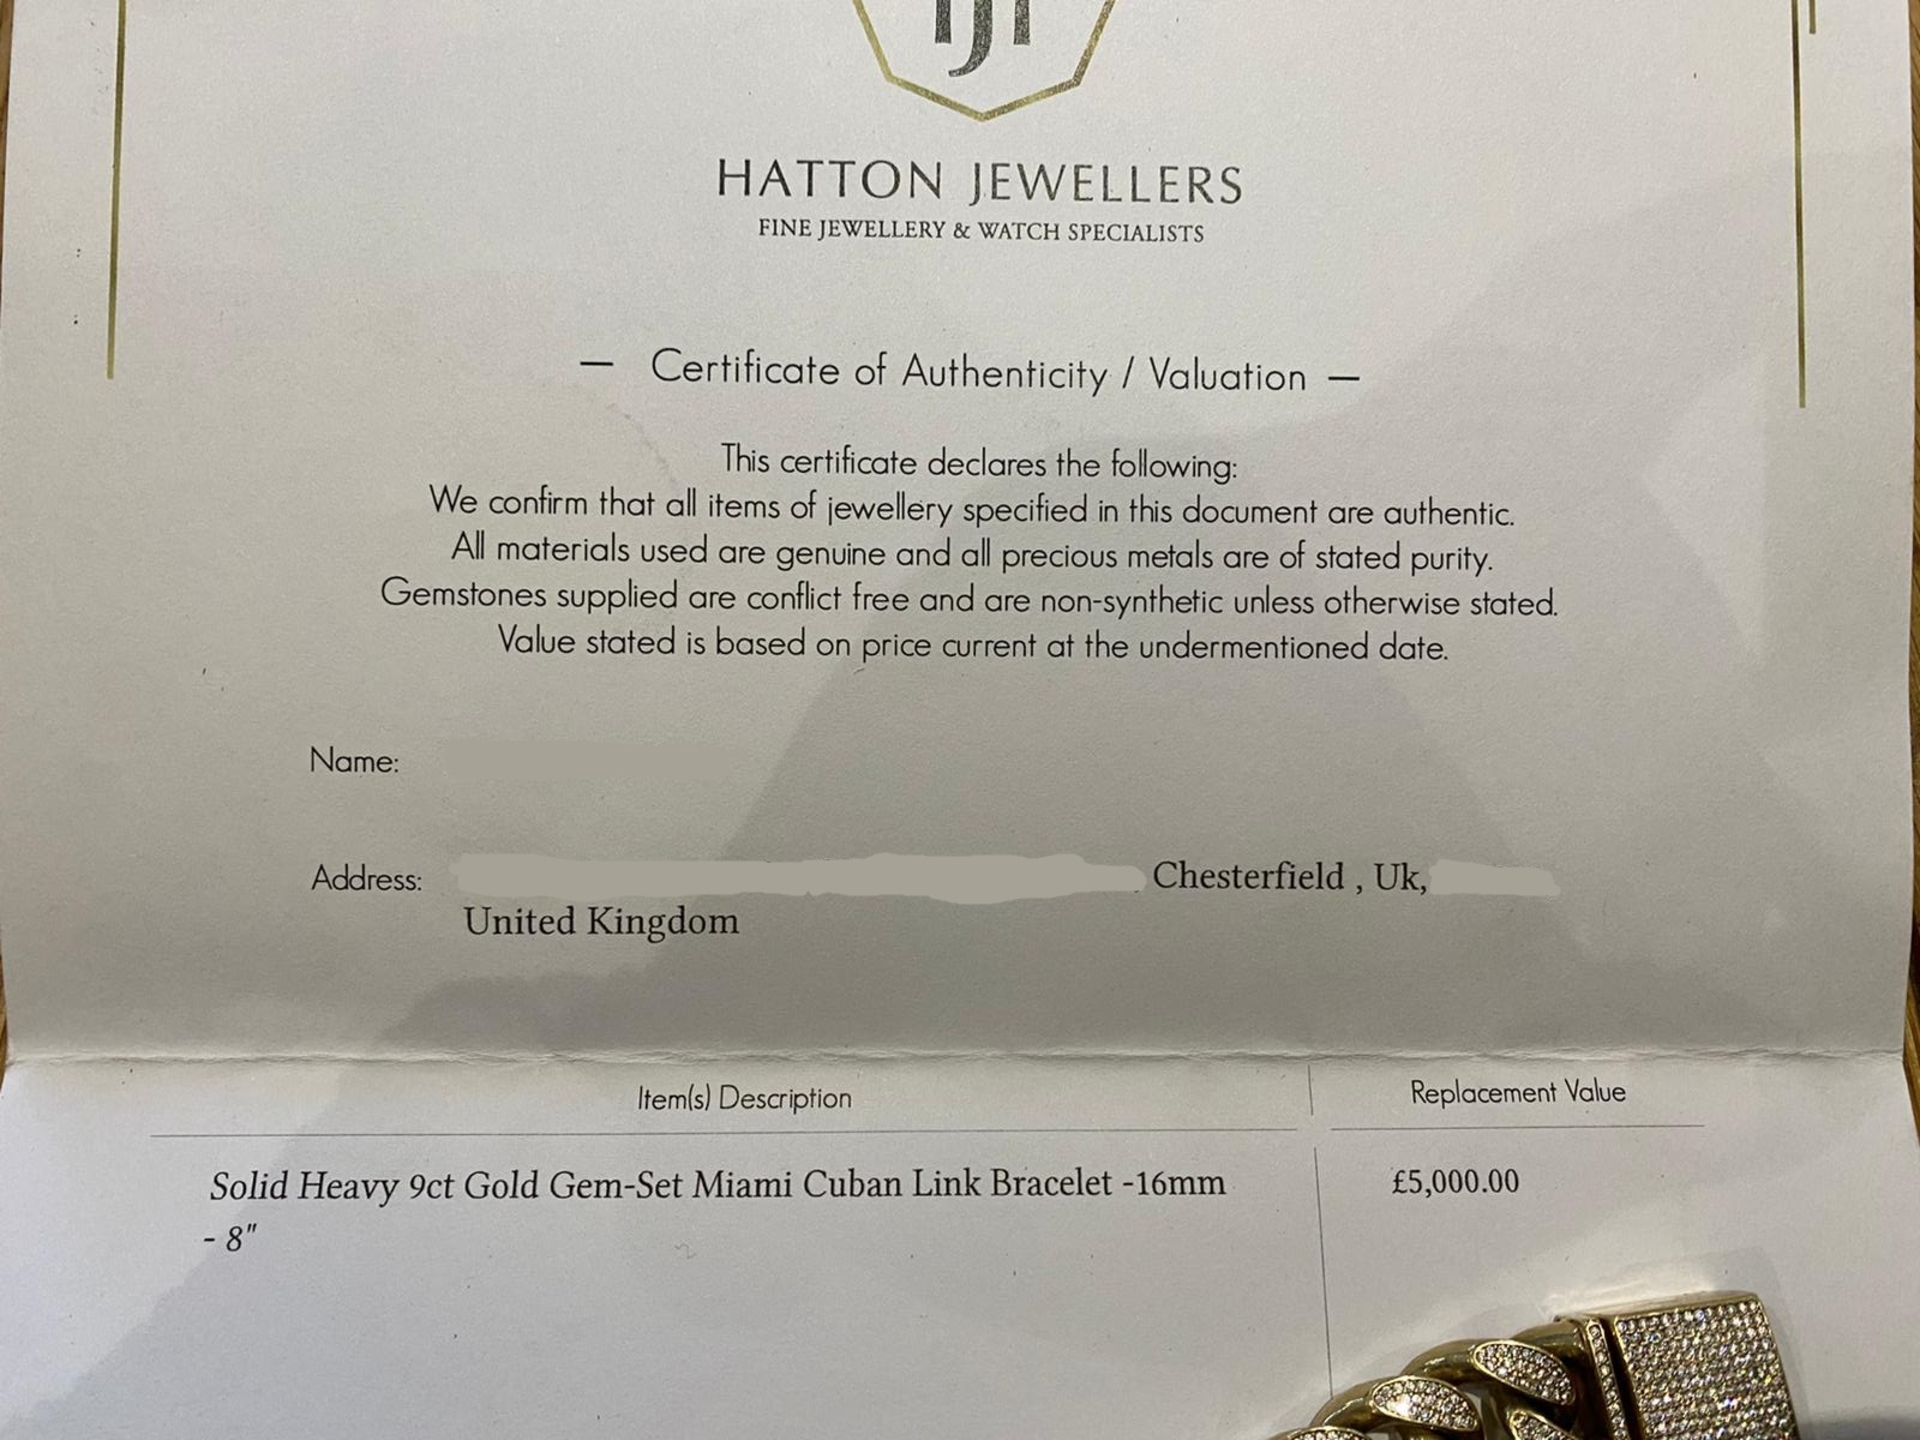 Solid heavy 9ct gold gem Miami Cuban link bracelet-16mm, Comes with certificates of authenticity - Image 5 of 5